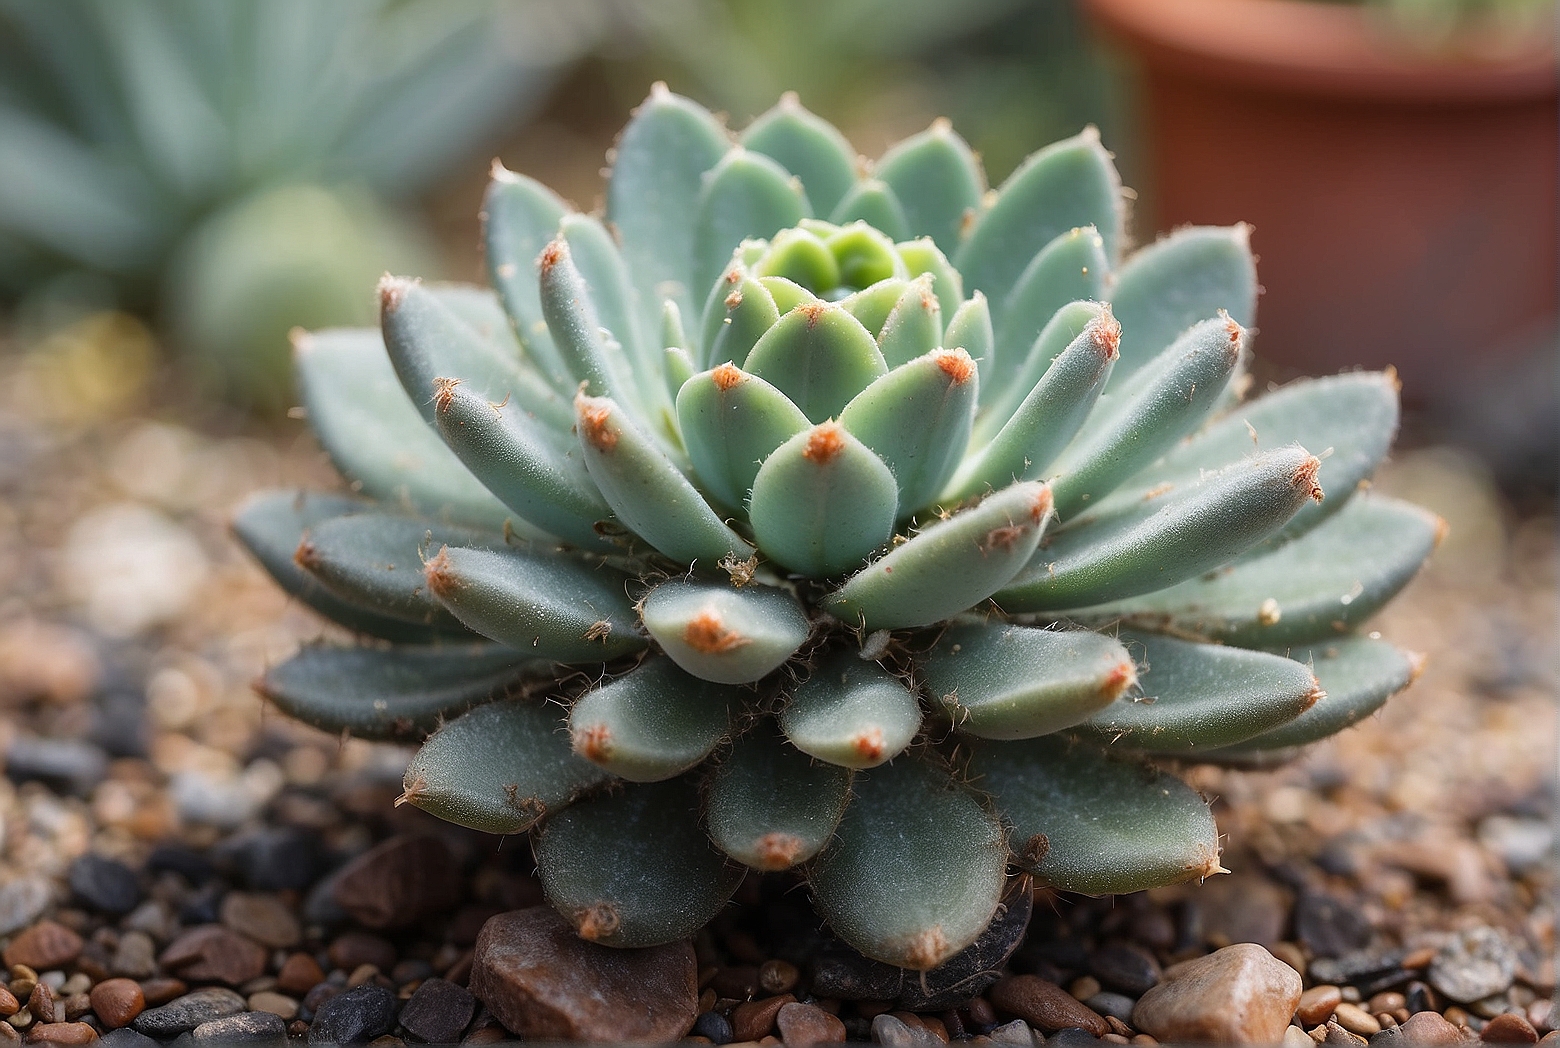 A Beginner’s Guide to Growing Peyote Cactus from Pad